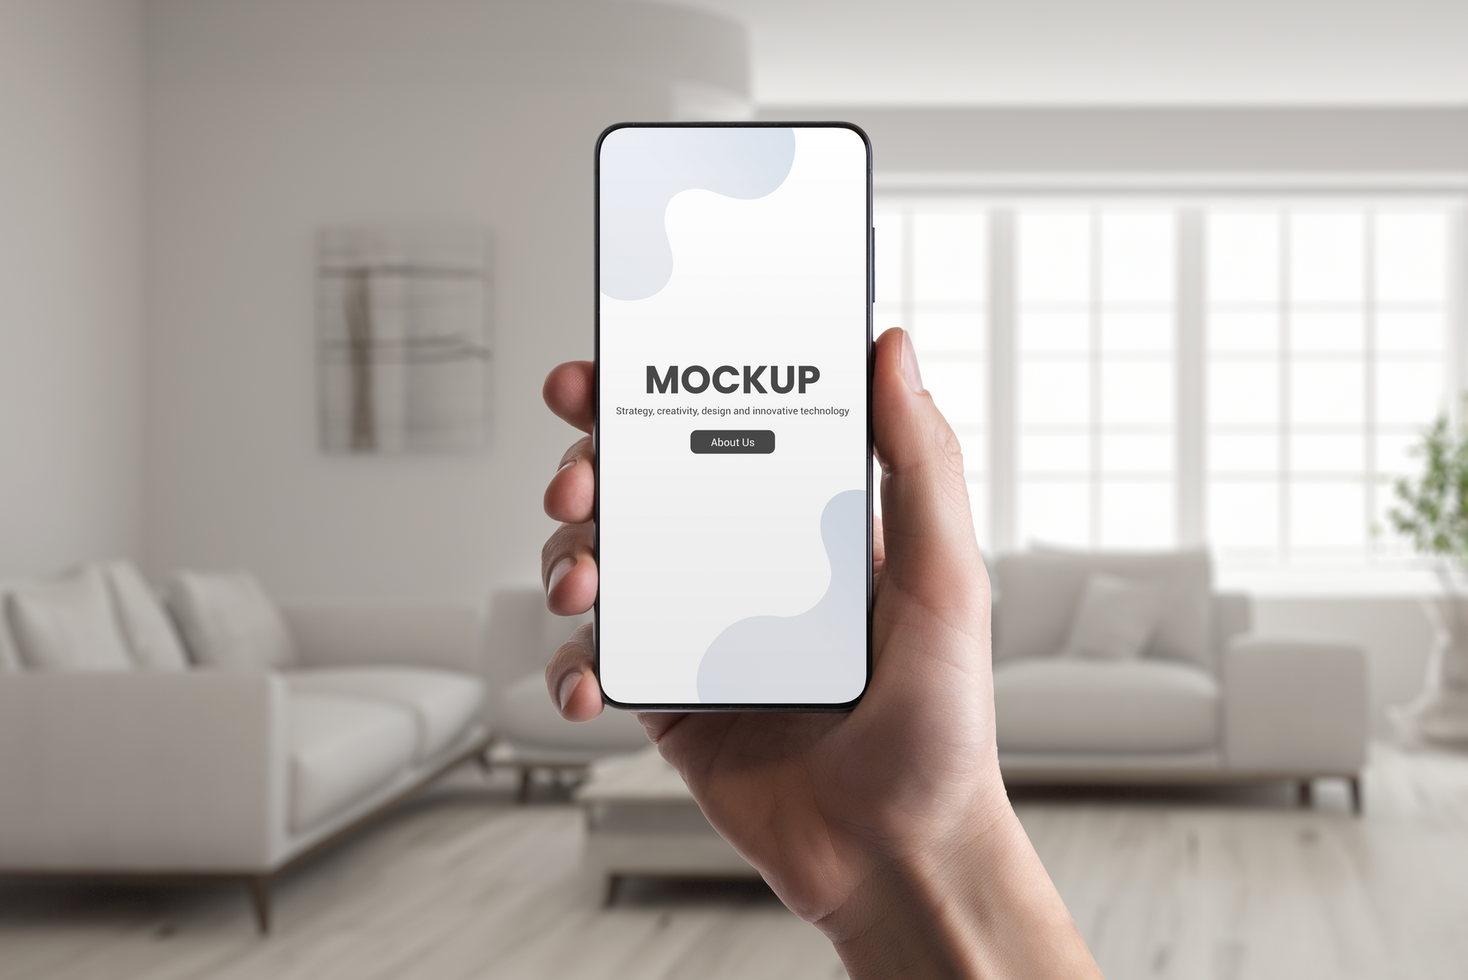 Phone mockup in hand with real estate interior in background psd